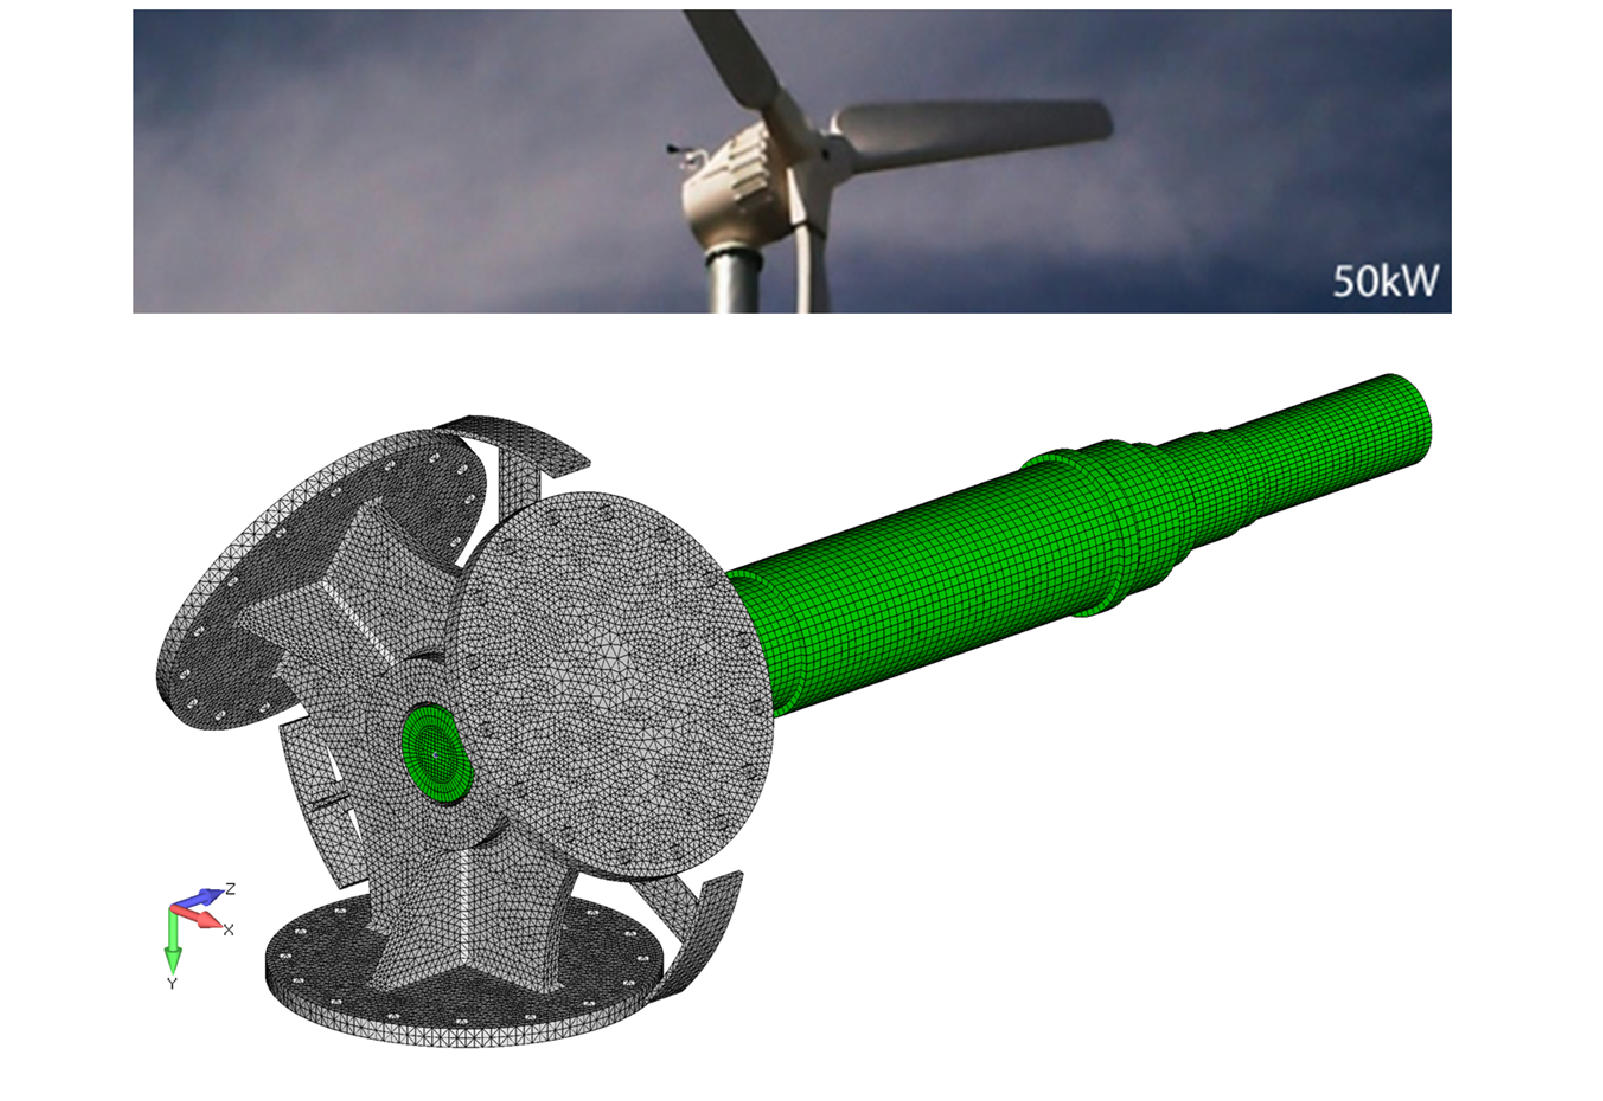 FEA simulation work by Predictive Engineering on 50 kW wind turbine blade hub, drive shaft and nacelle.